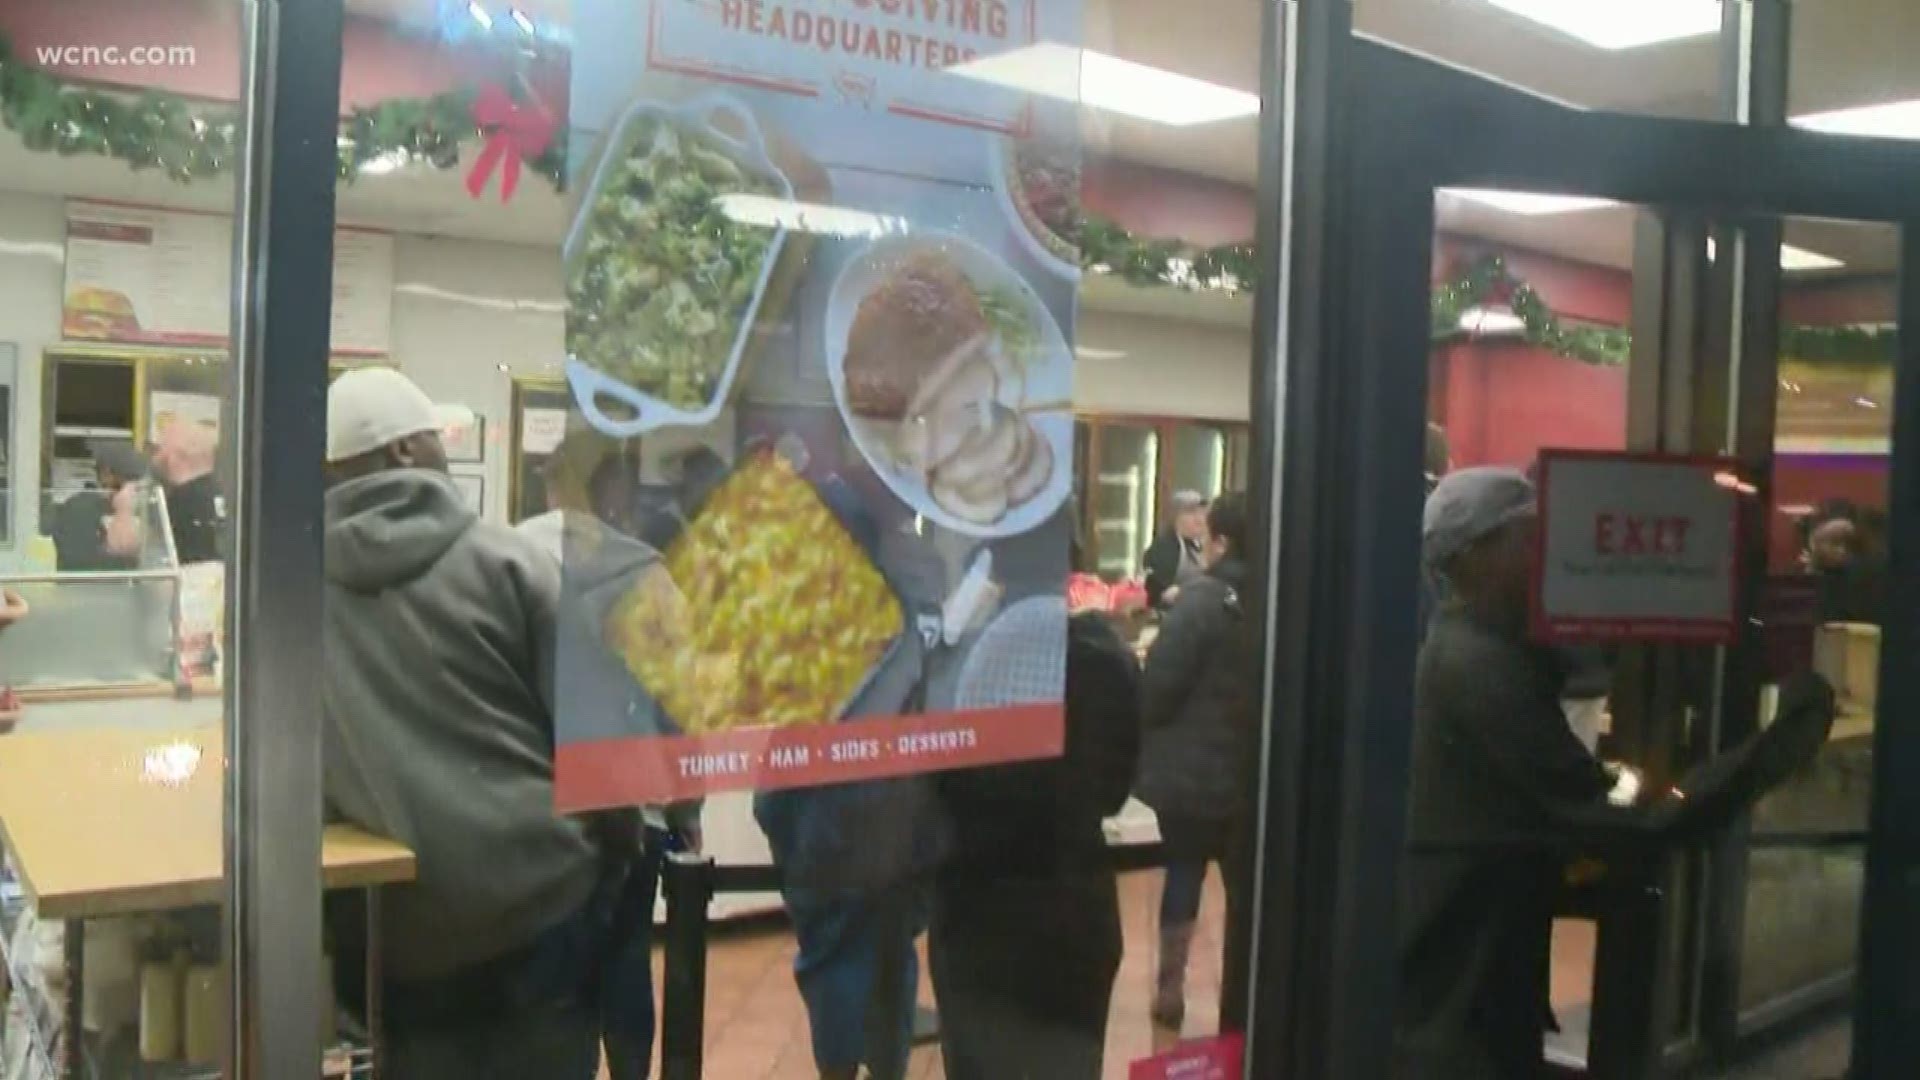 Every year, dozens of people line up to get their ham for the holidays.